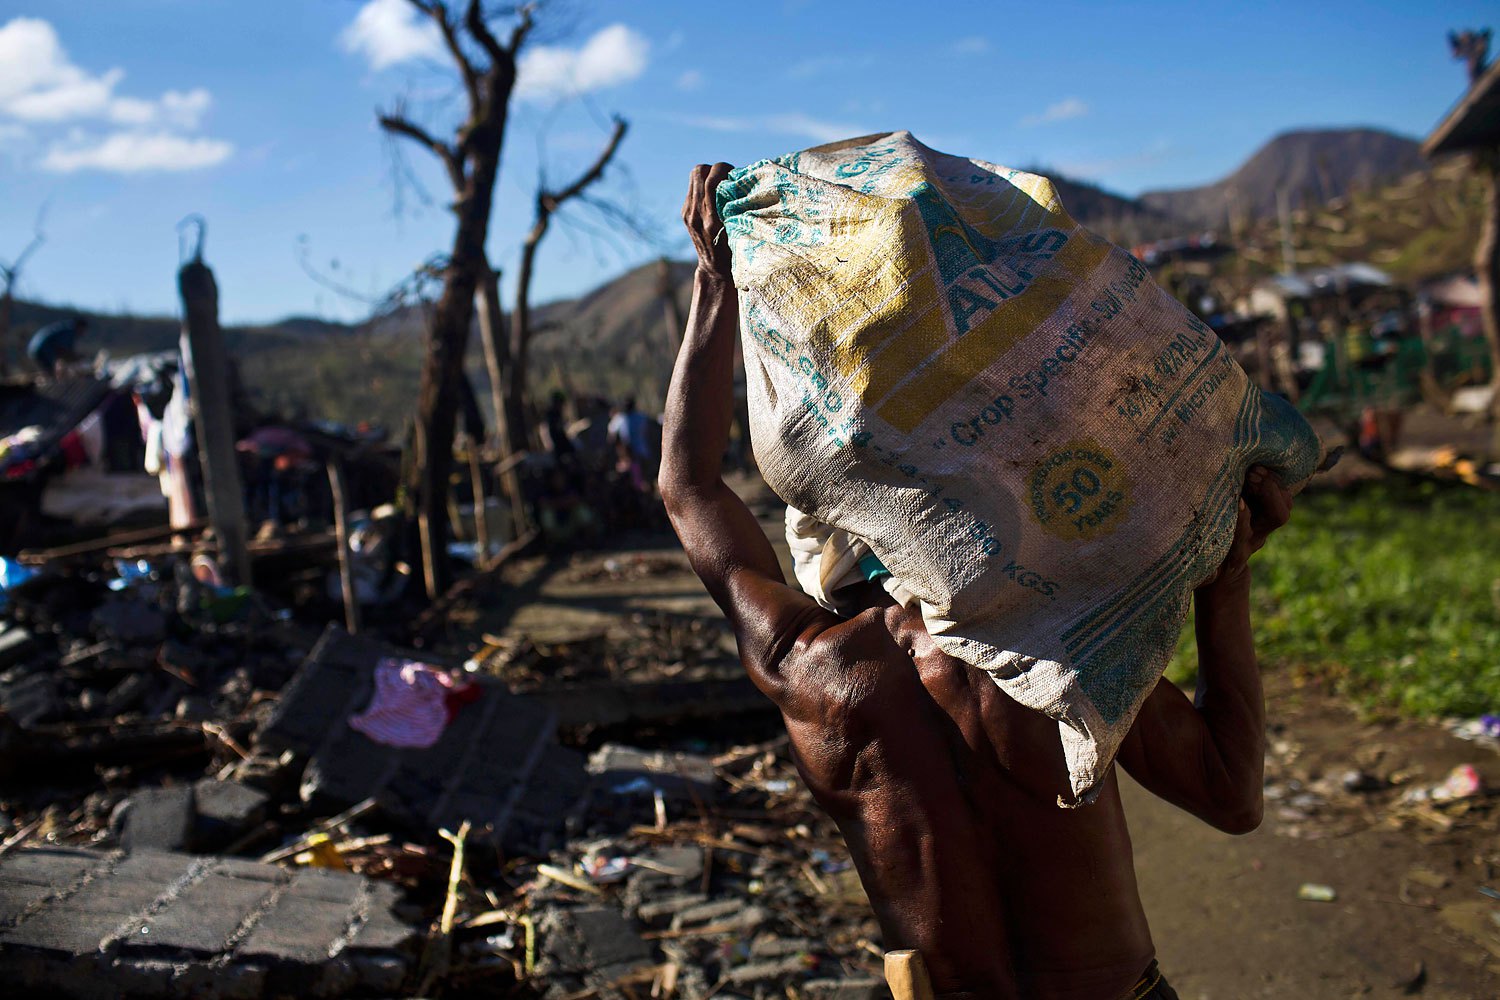 A Typhoon Haiyan survivor carries a bag of his recovered belongings in the ruins of his rural neighborhood on the outskirts of Tacloban, Philippines on November 18, 2013.